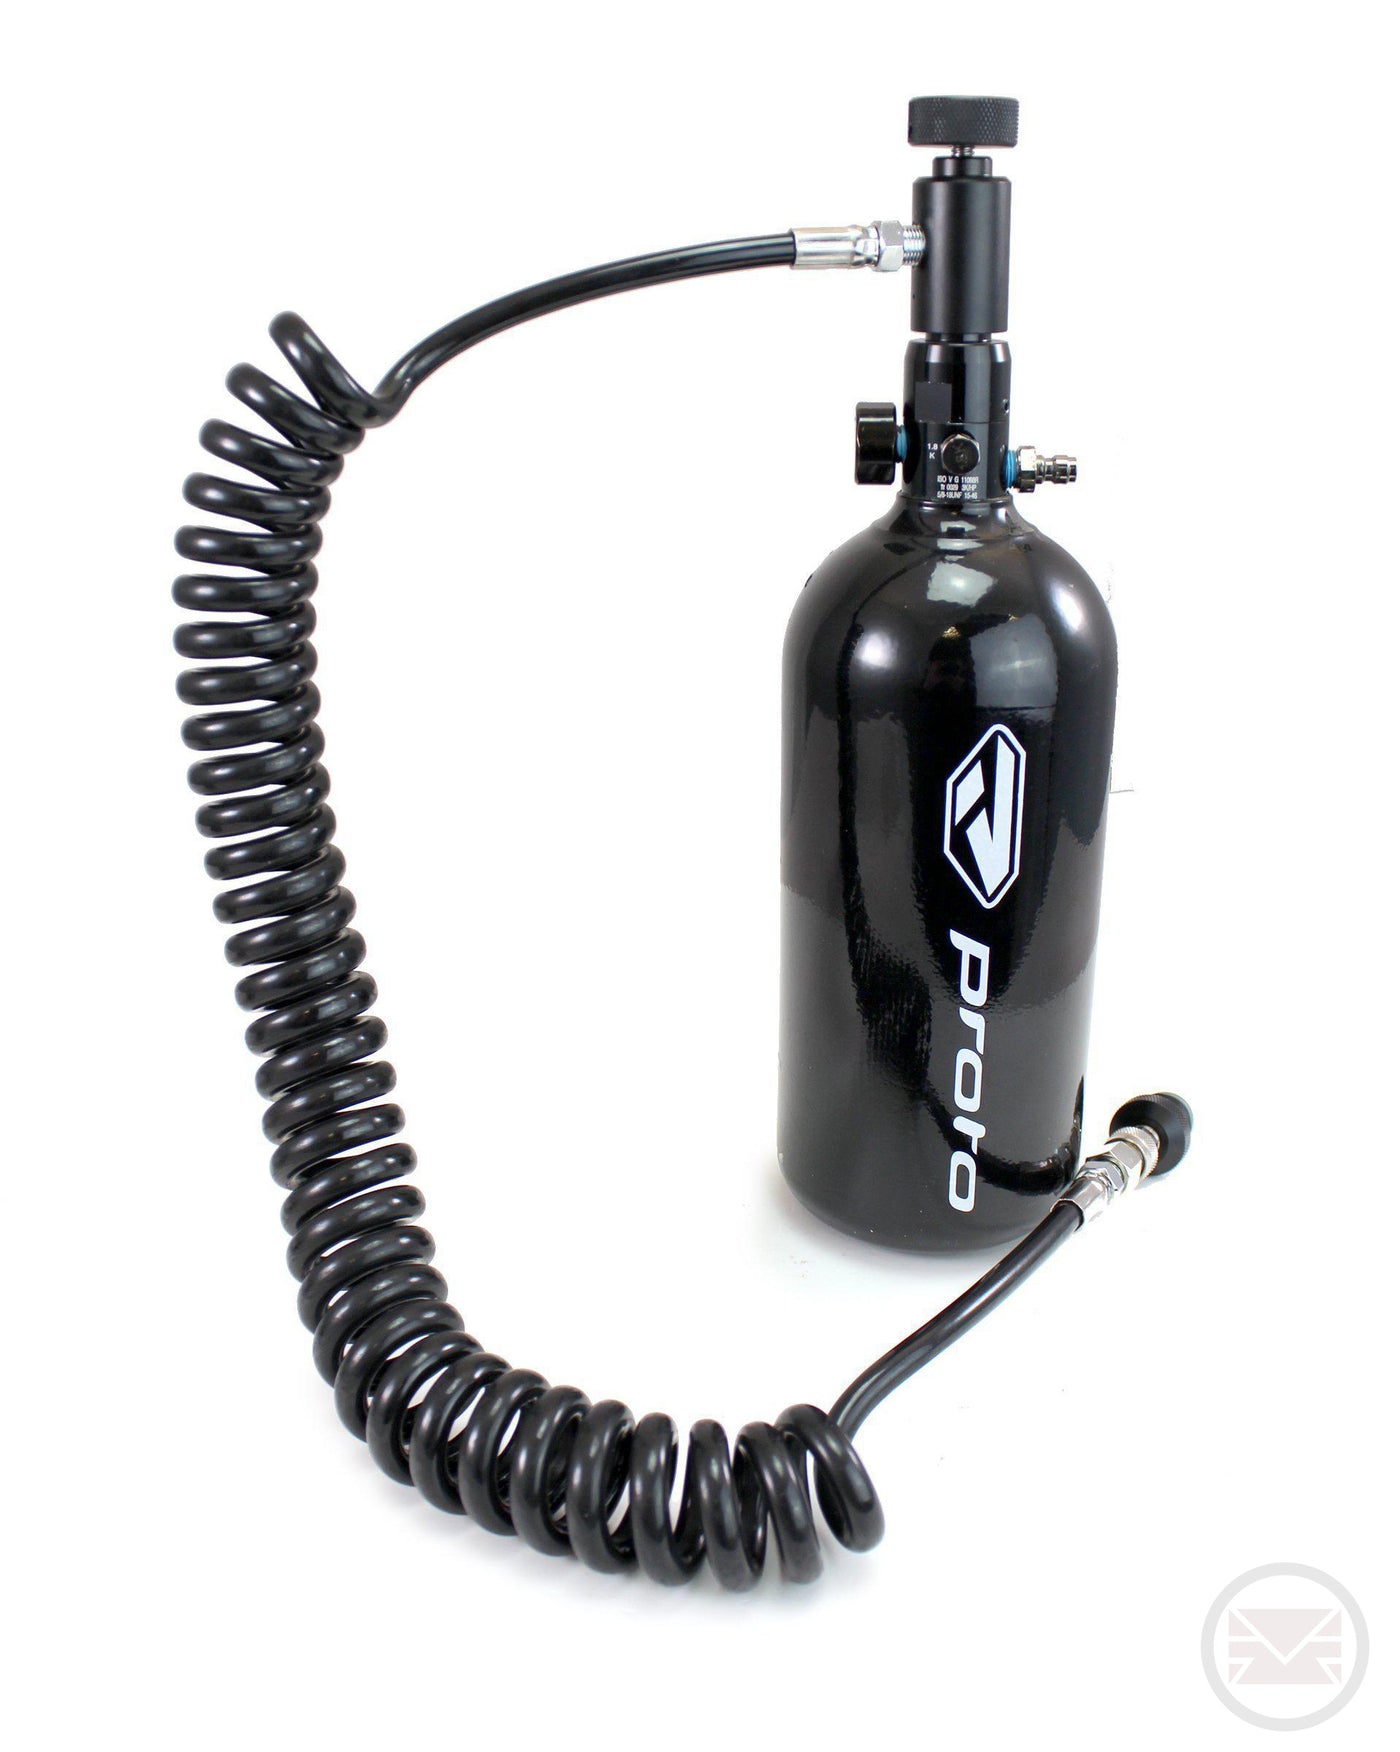 Shogun Remote Air Line for Paintball and Airsoft